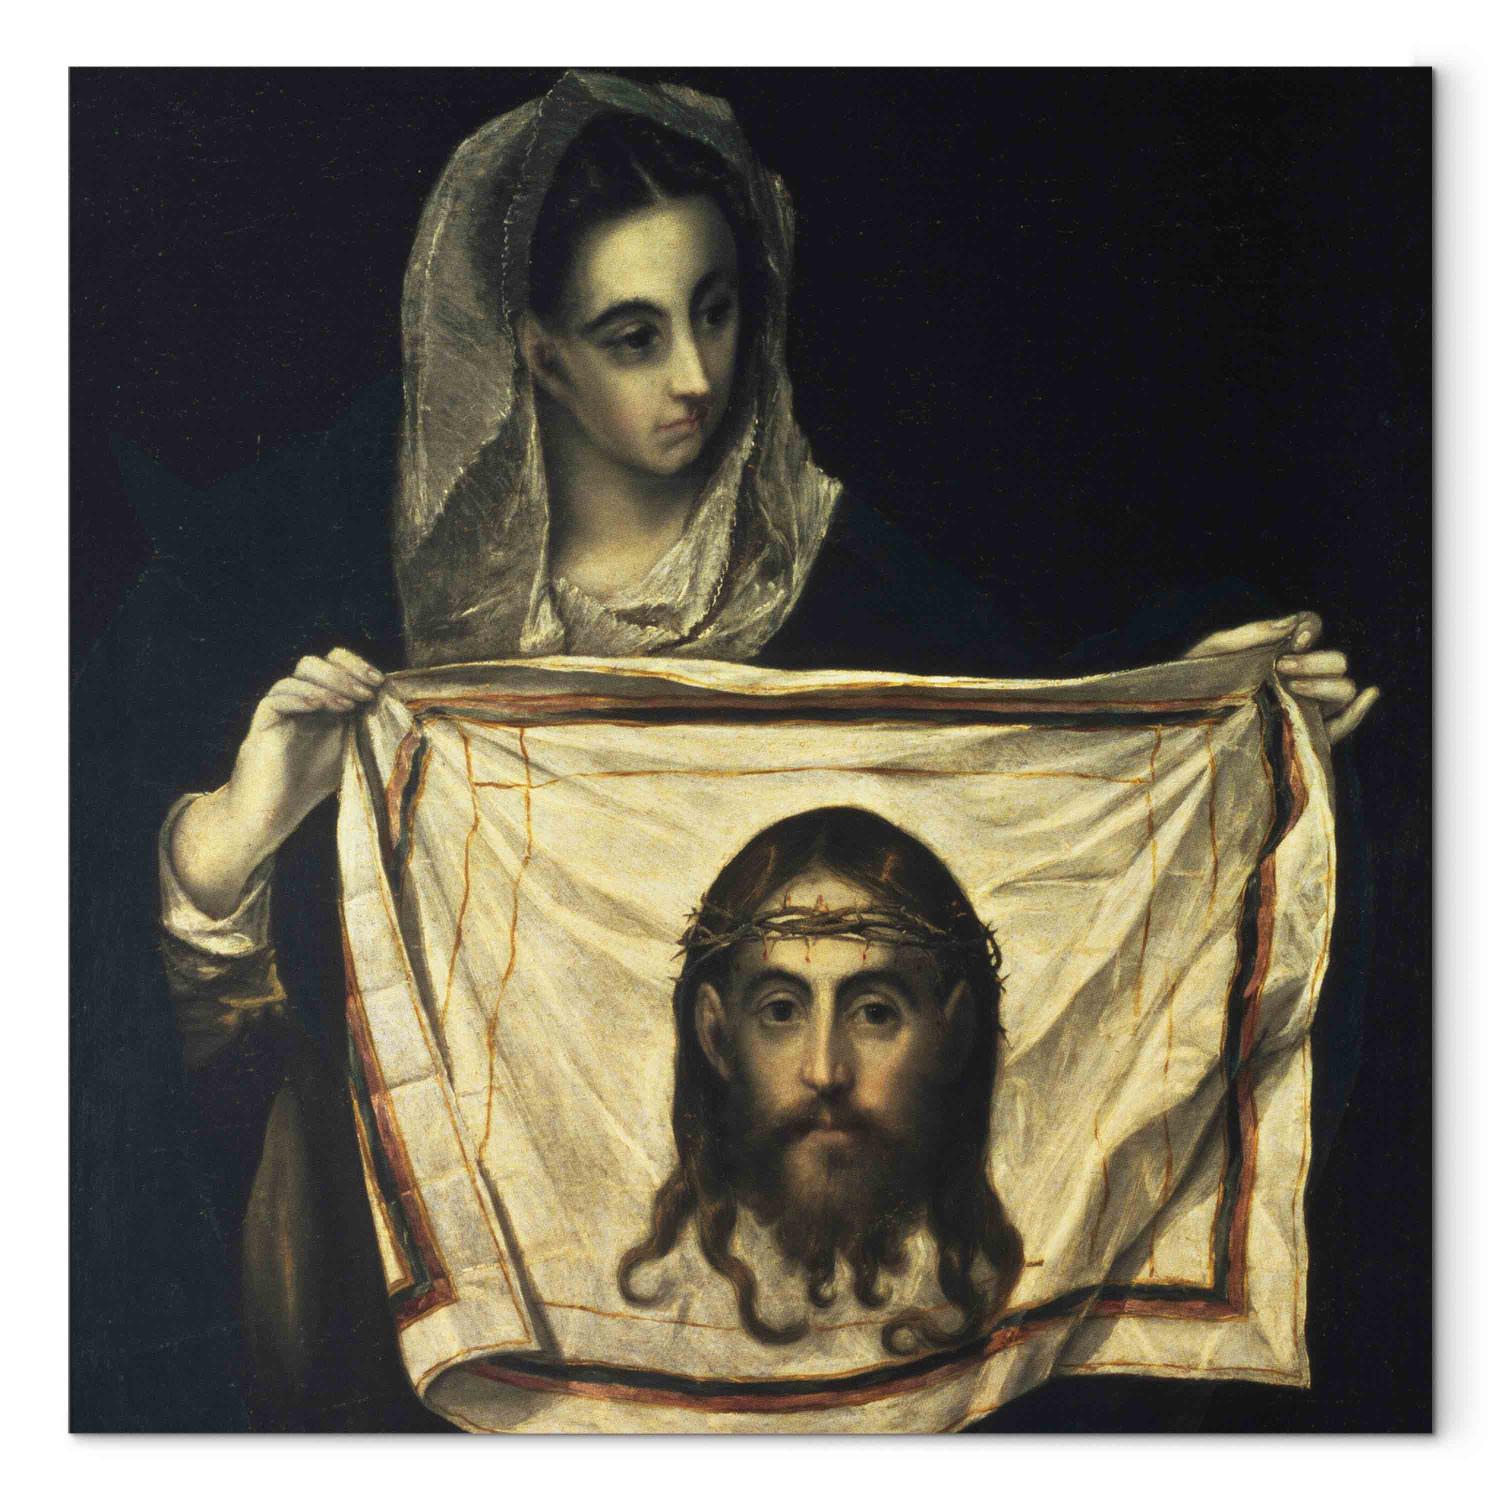 Canvas St.Veronica with the Holy Shroud